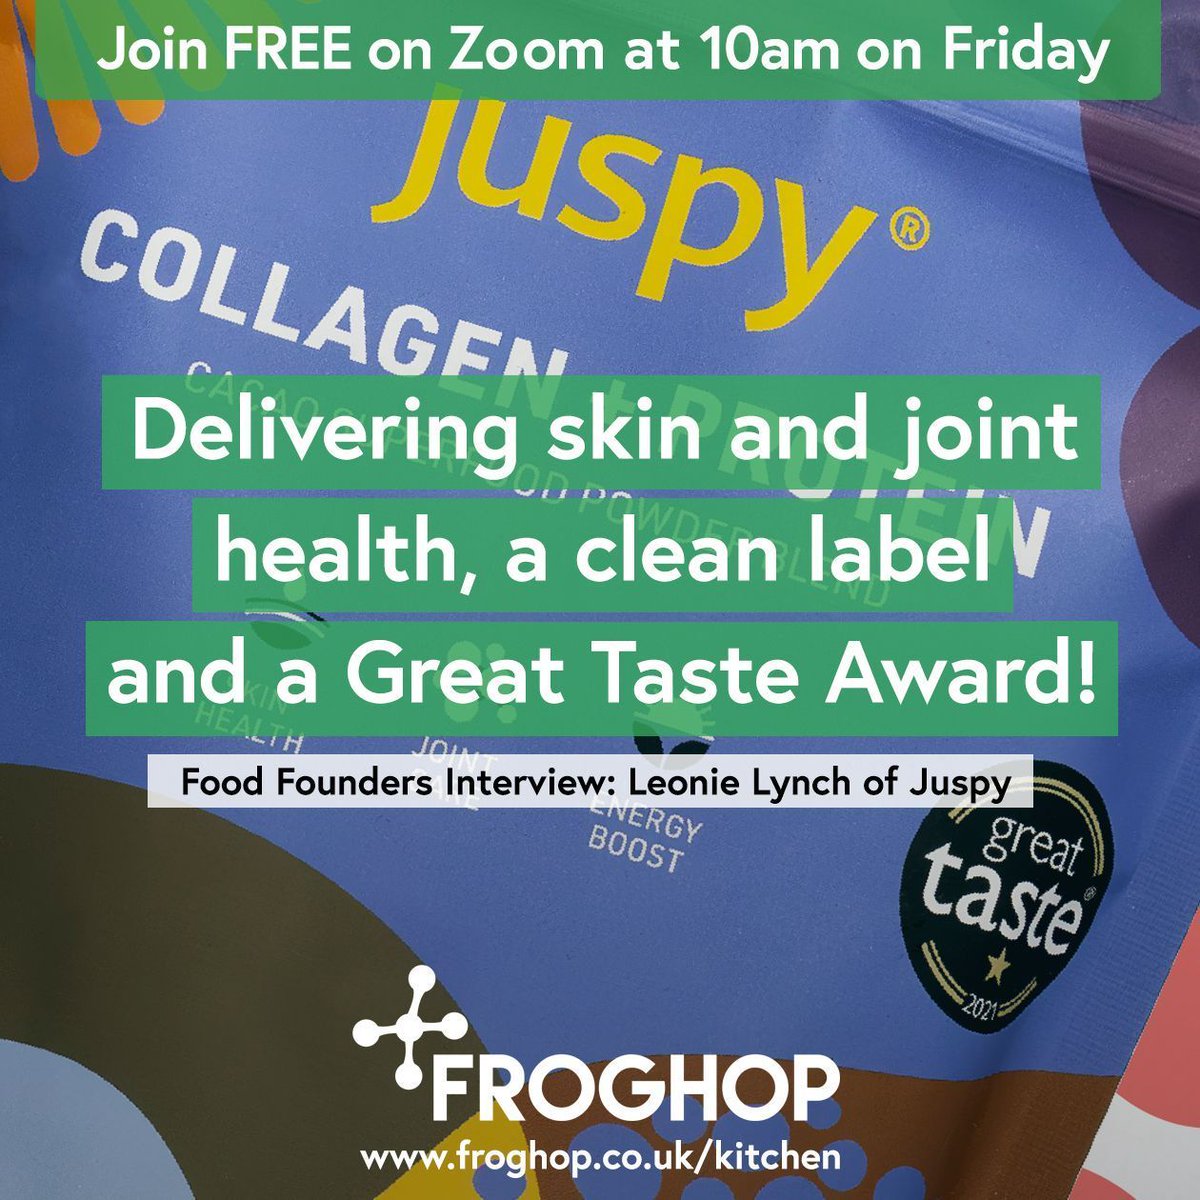 How to combine skin and joint health, energy boosting ingredients and a clean label with a Great Taste Award? Find out with @juspyoriginal on Friday at 10am. Register now 👉 buff.ly/3Ris9ls

#foodfounders #foodpreneur #foodbiz #jointhealth #cleanlabel  #greattasteaward